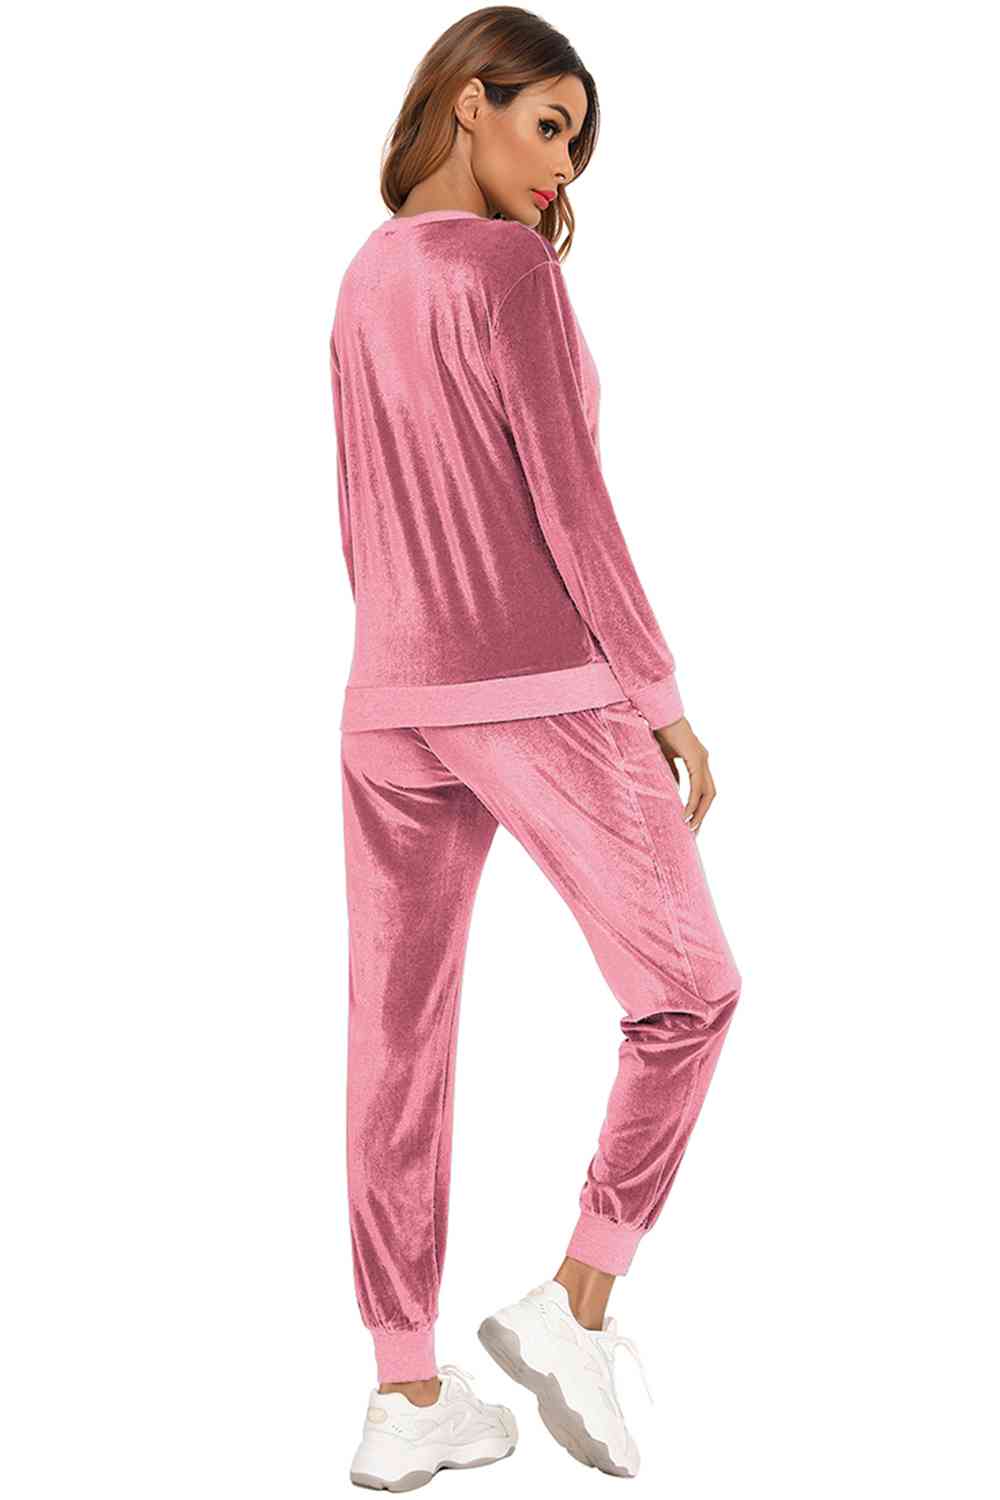 Round Neck Long Sleeve Loungewear Set with Pockets - GemThreads Boutique